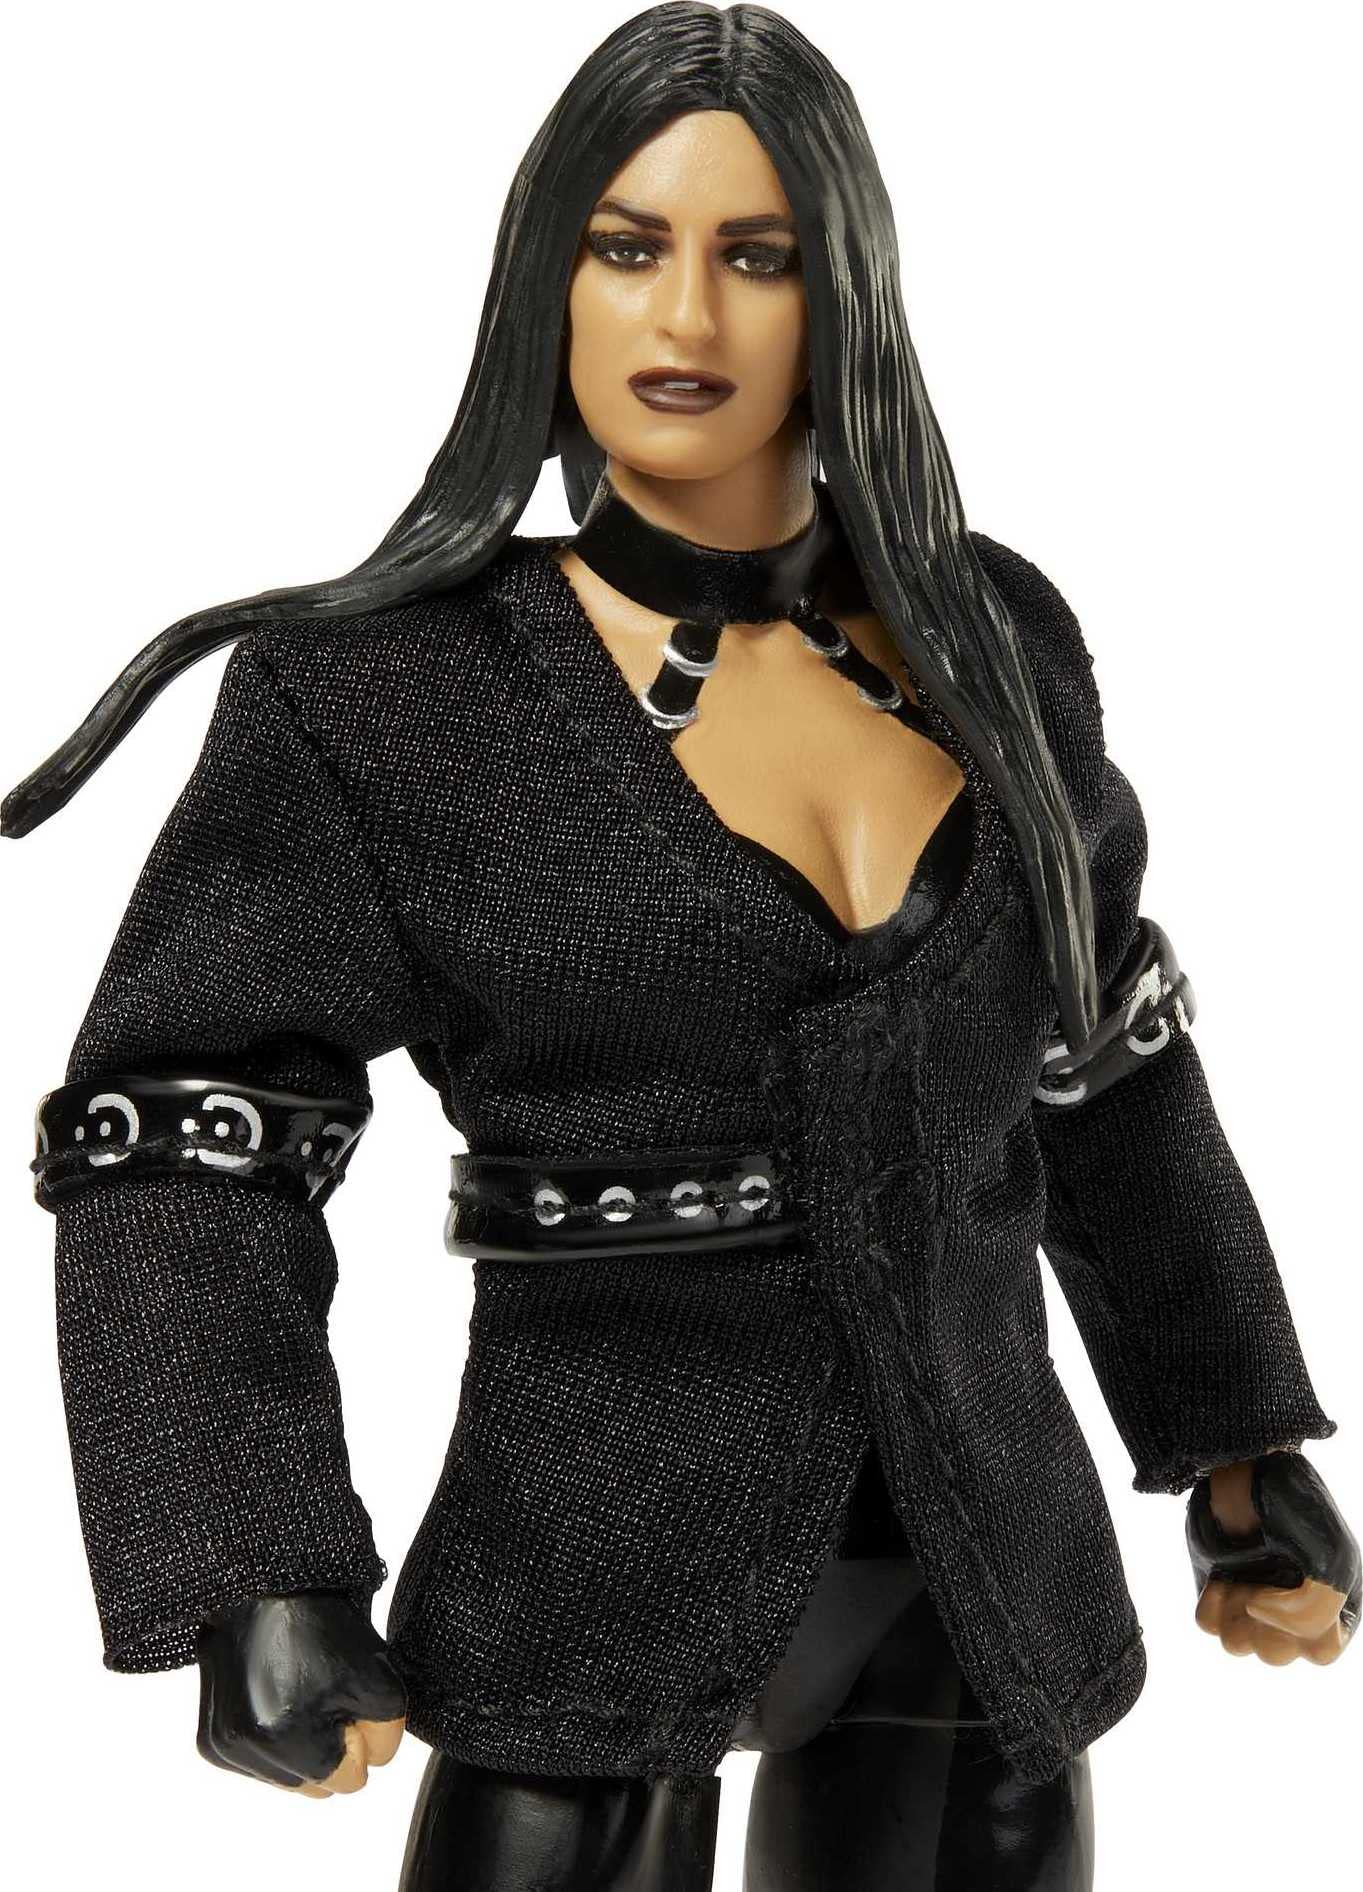 Mattel WWE Sonya Deville Elite Collection Action Figure, Deluxe Articulation & Life-Like Detail with Iconic Accessories, 6-Inch